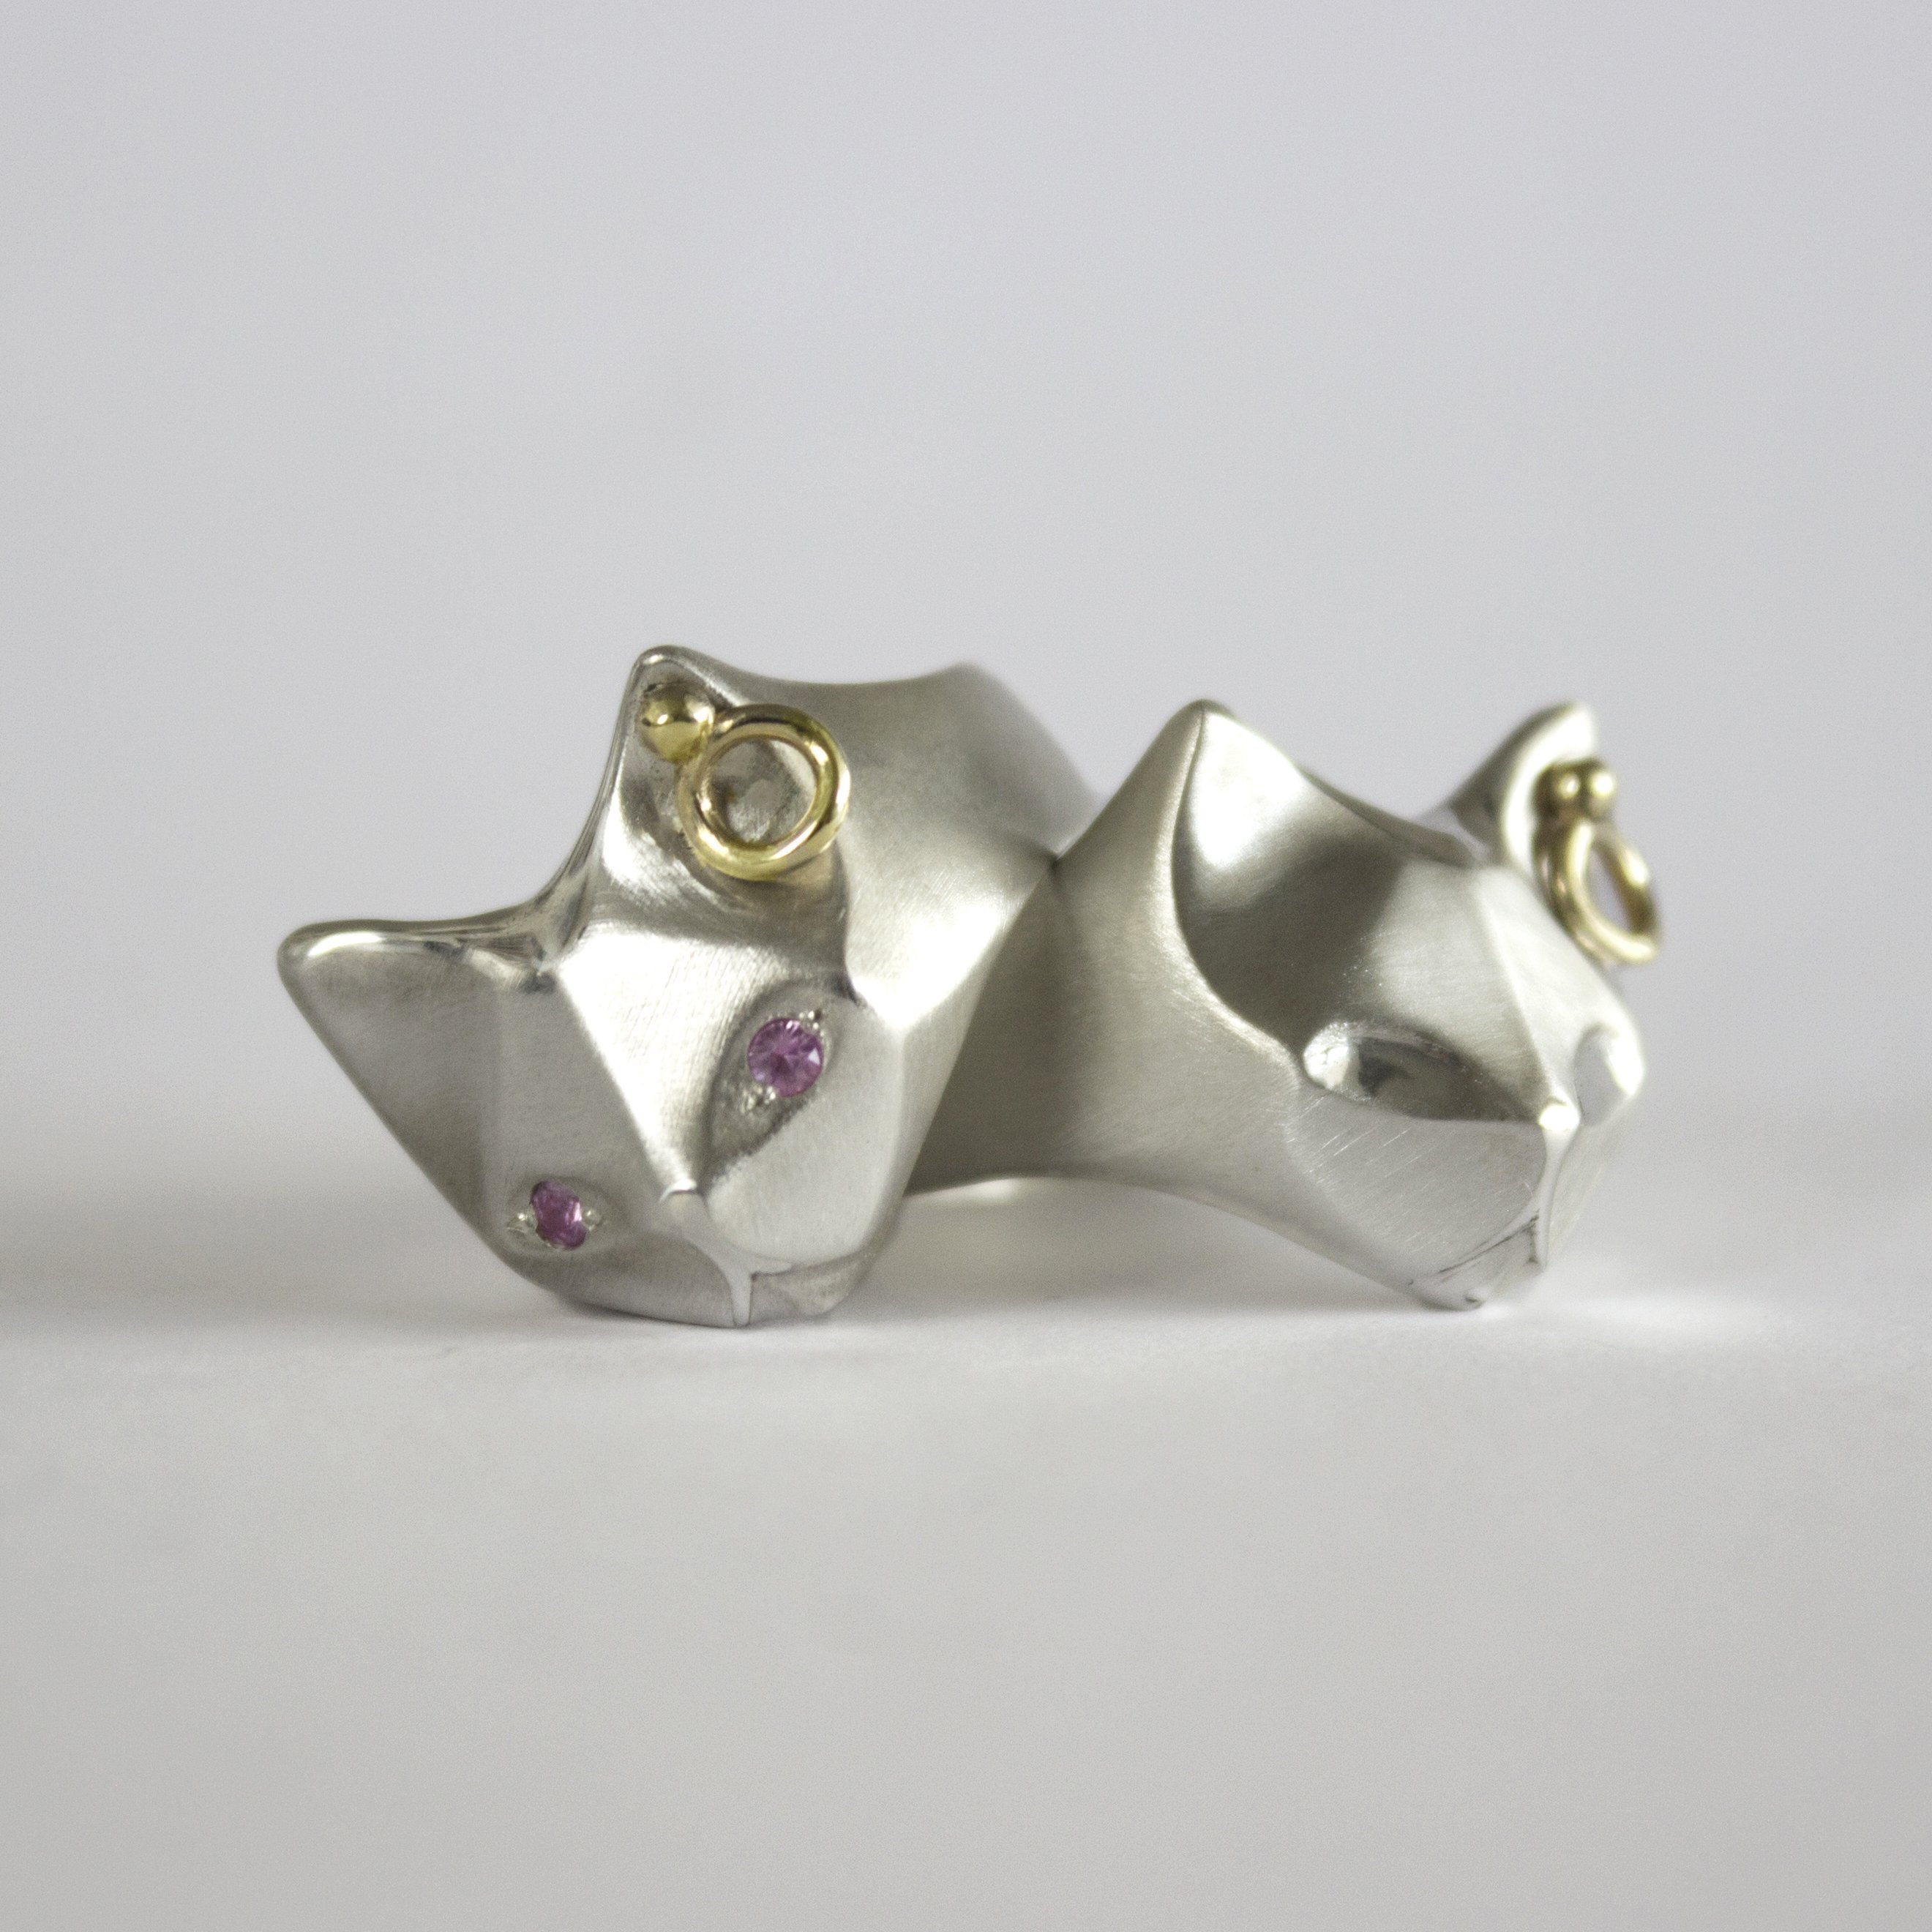 ___ Jewelry Cat Ring with Pink Sapphire Eyes & an Ear piercing